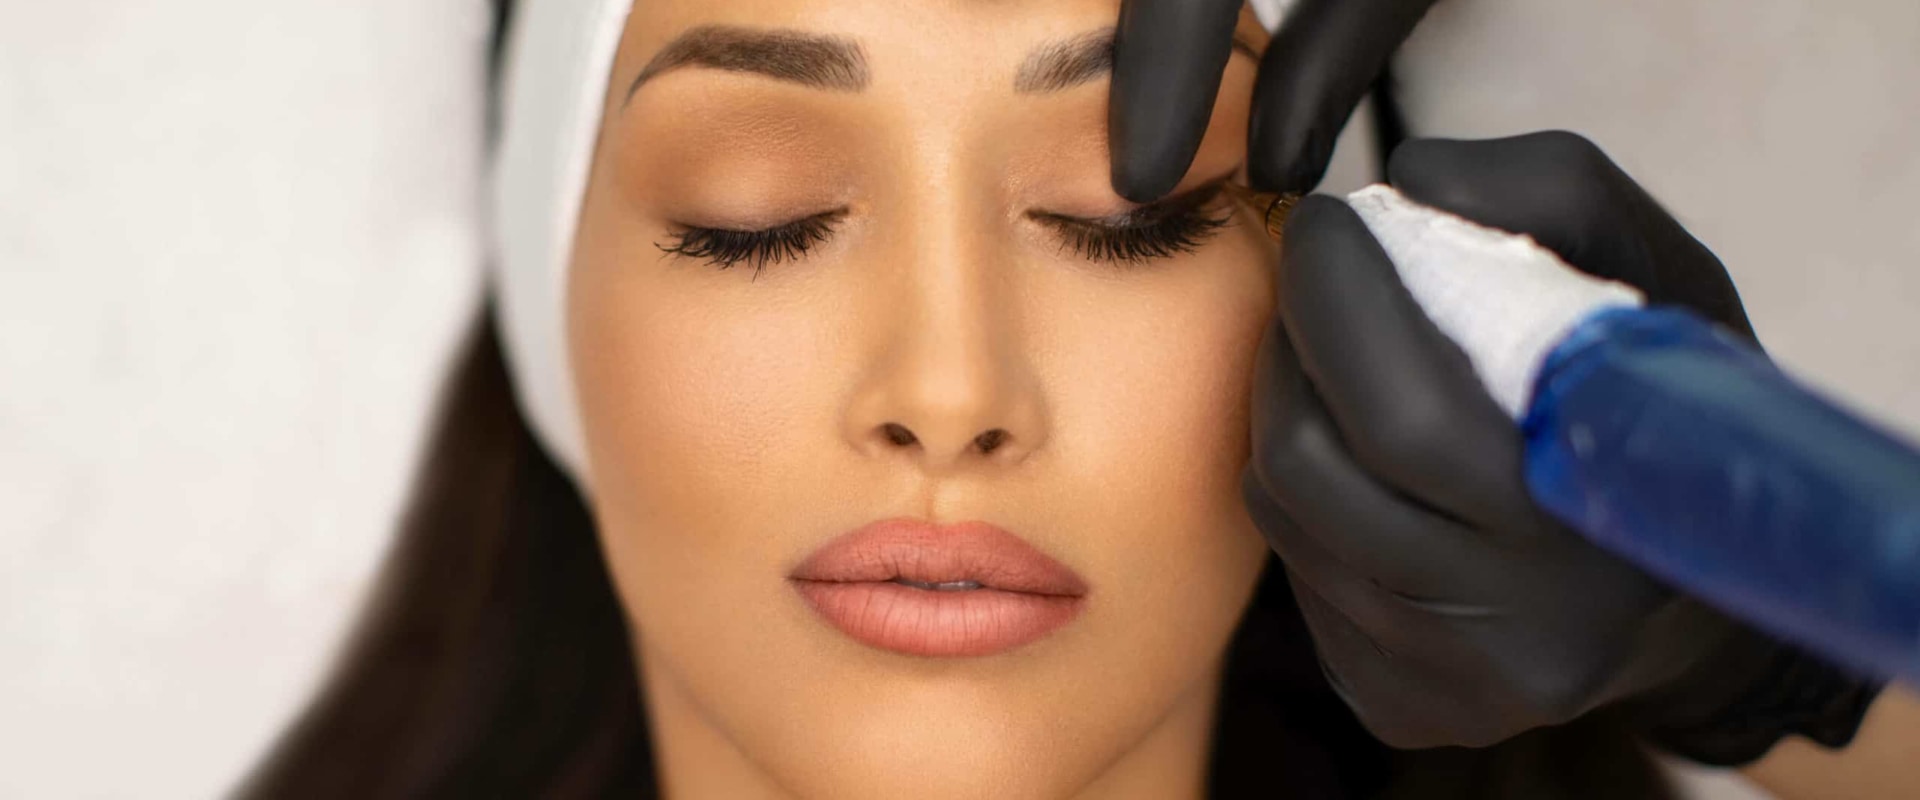 When can you use makeup after permanent eyeliner?